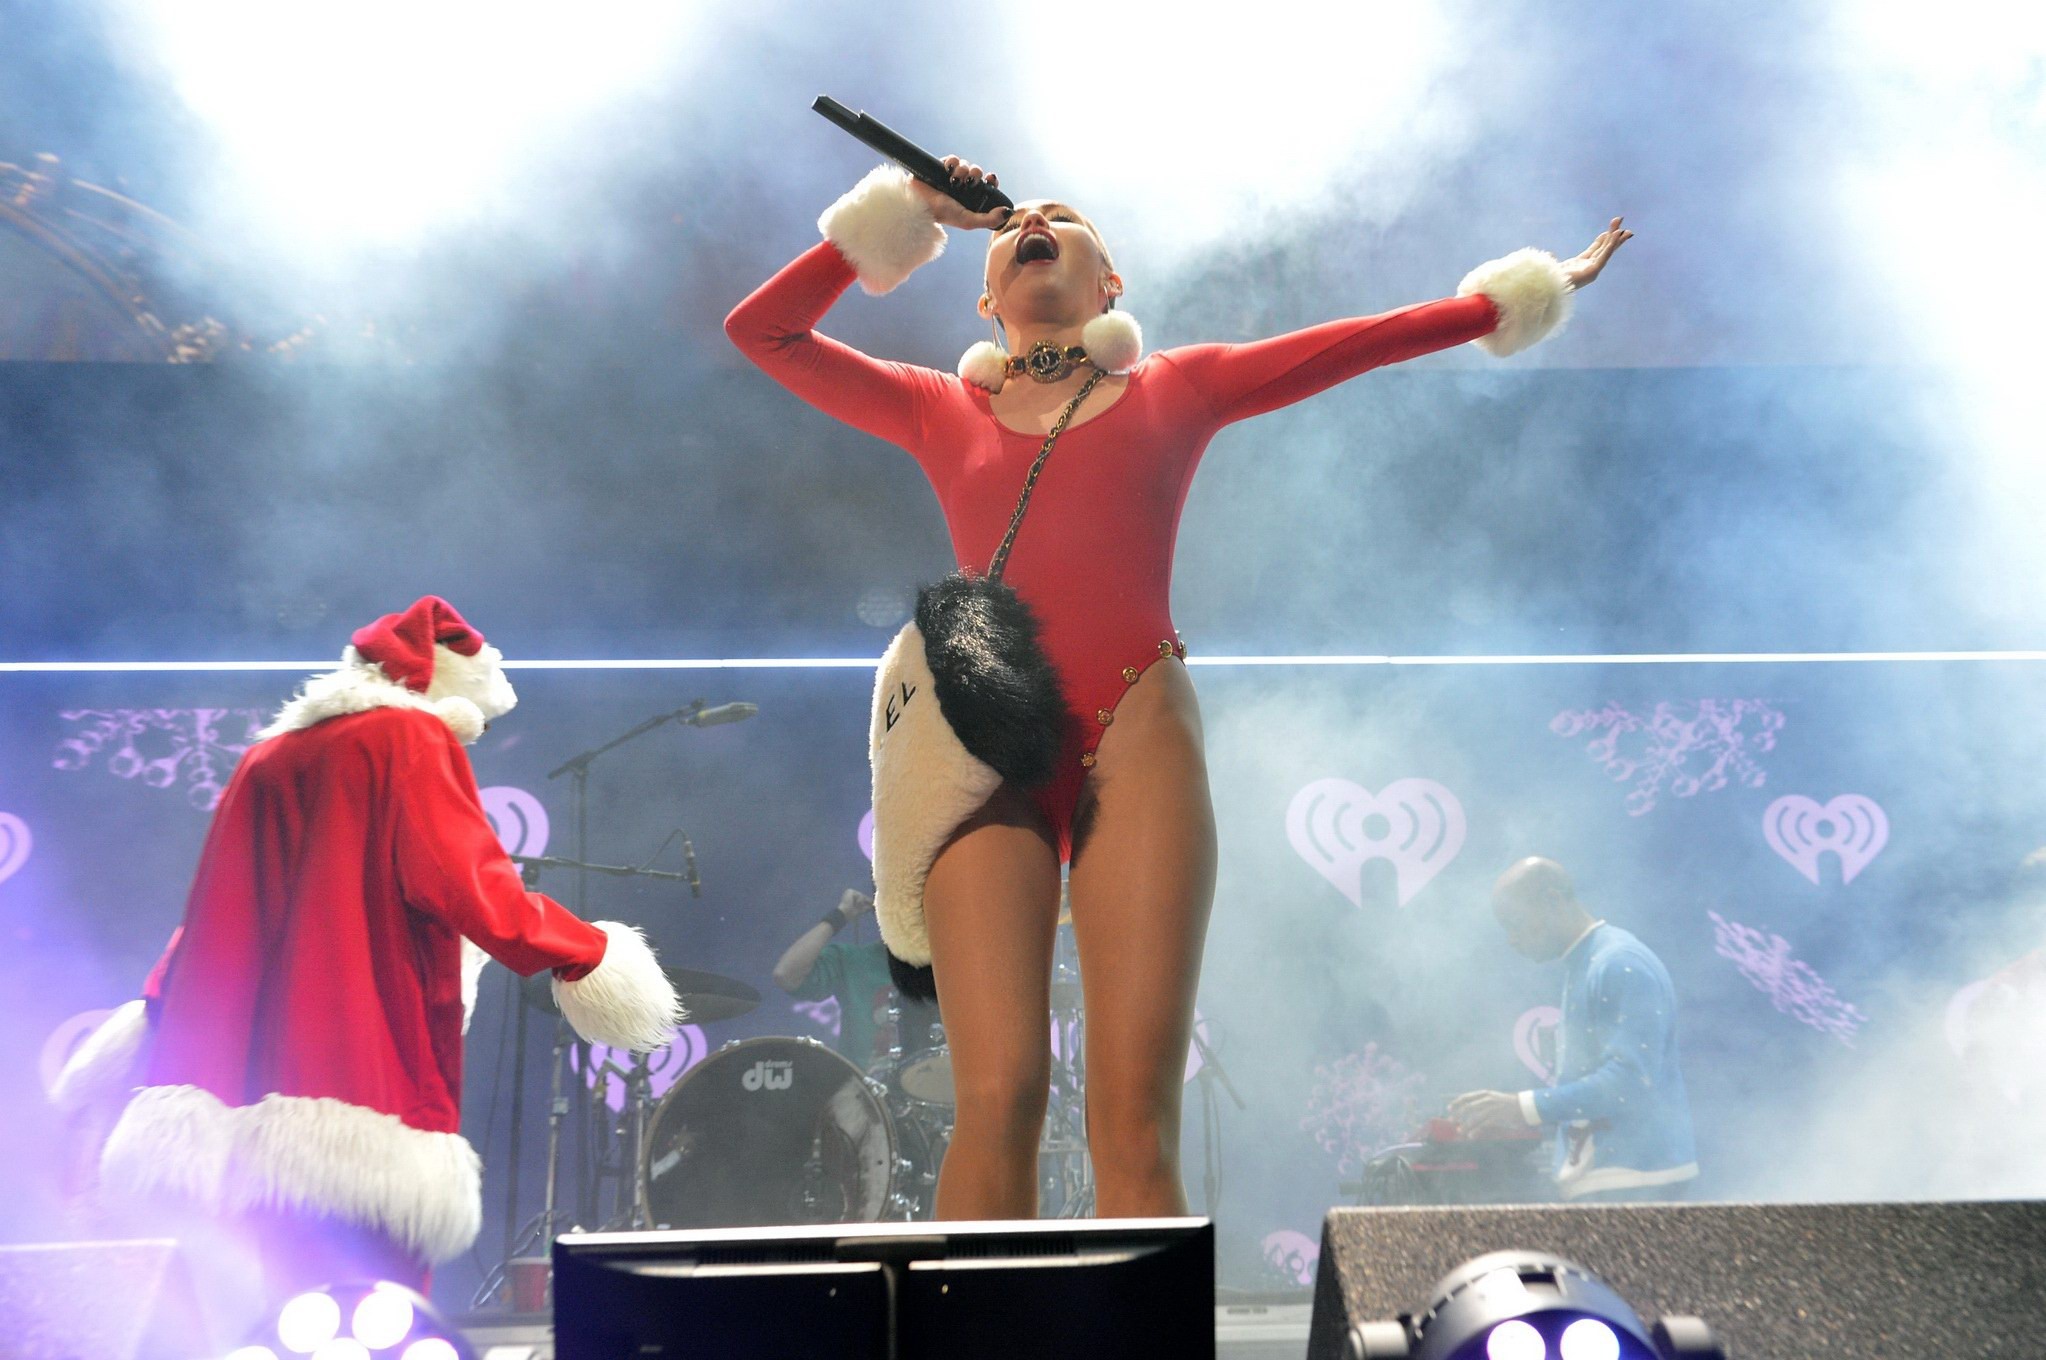 Miley Cyrus shows off pokies and ass wearing a red leotard on stage at 93.3 FLZ' #75209884